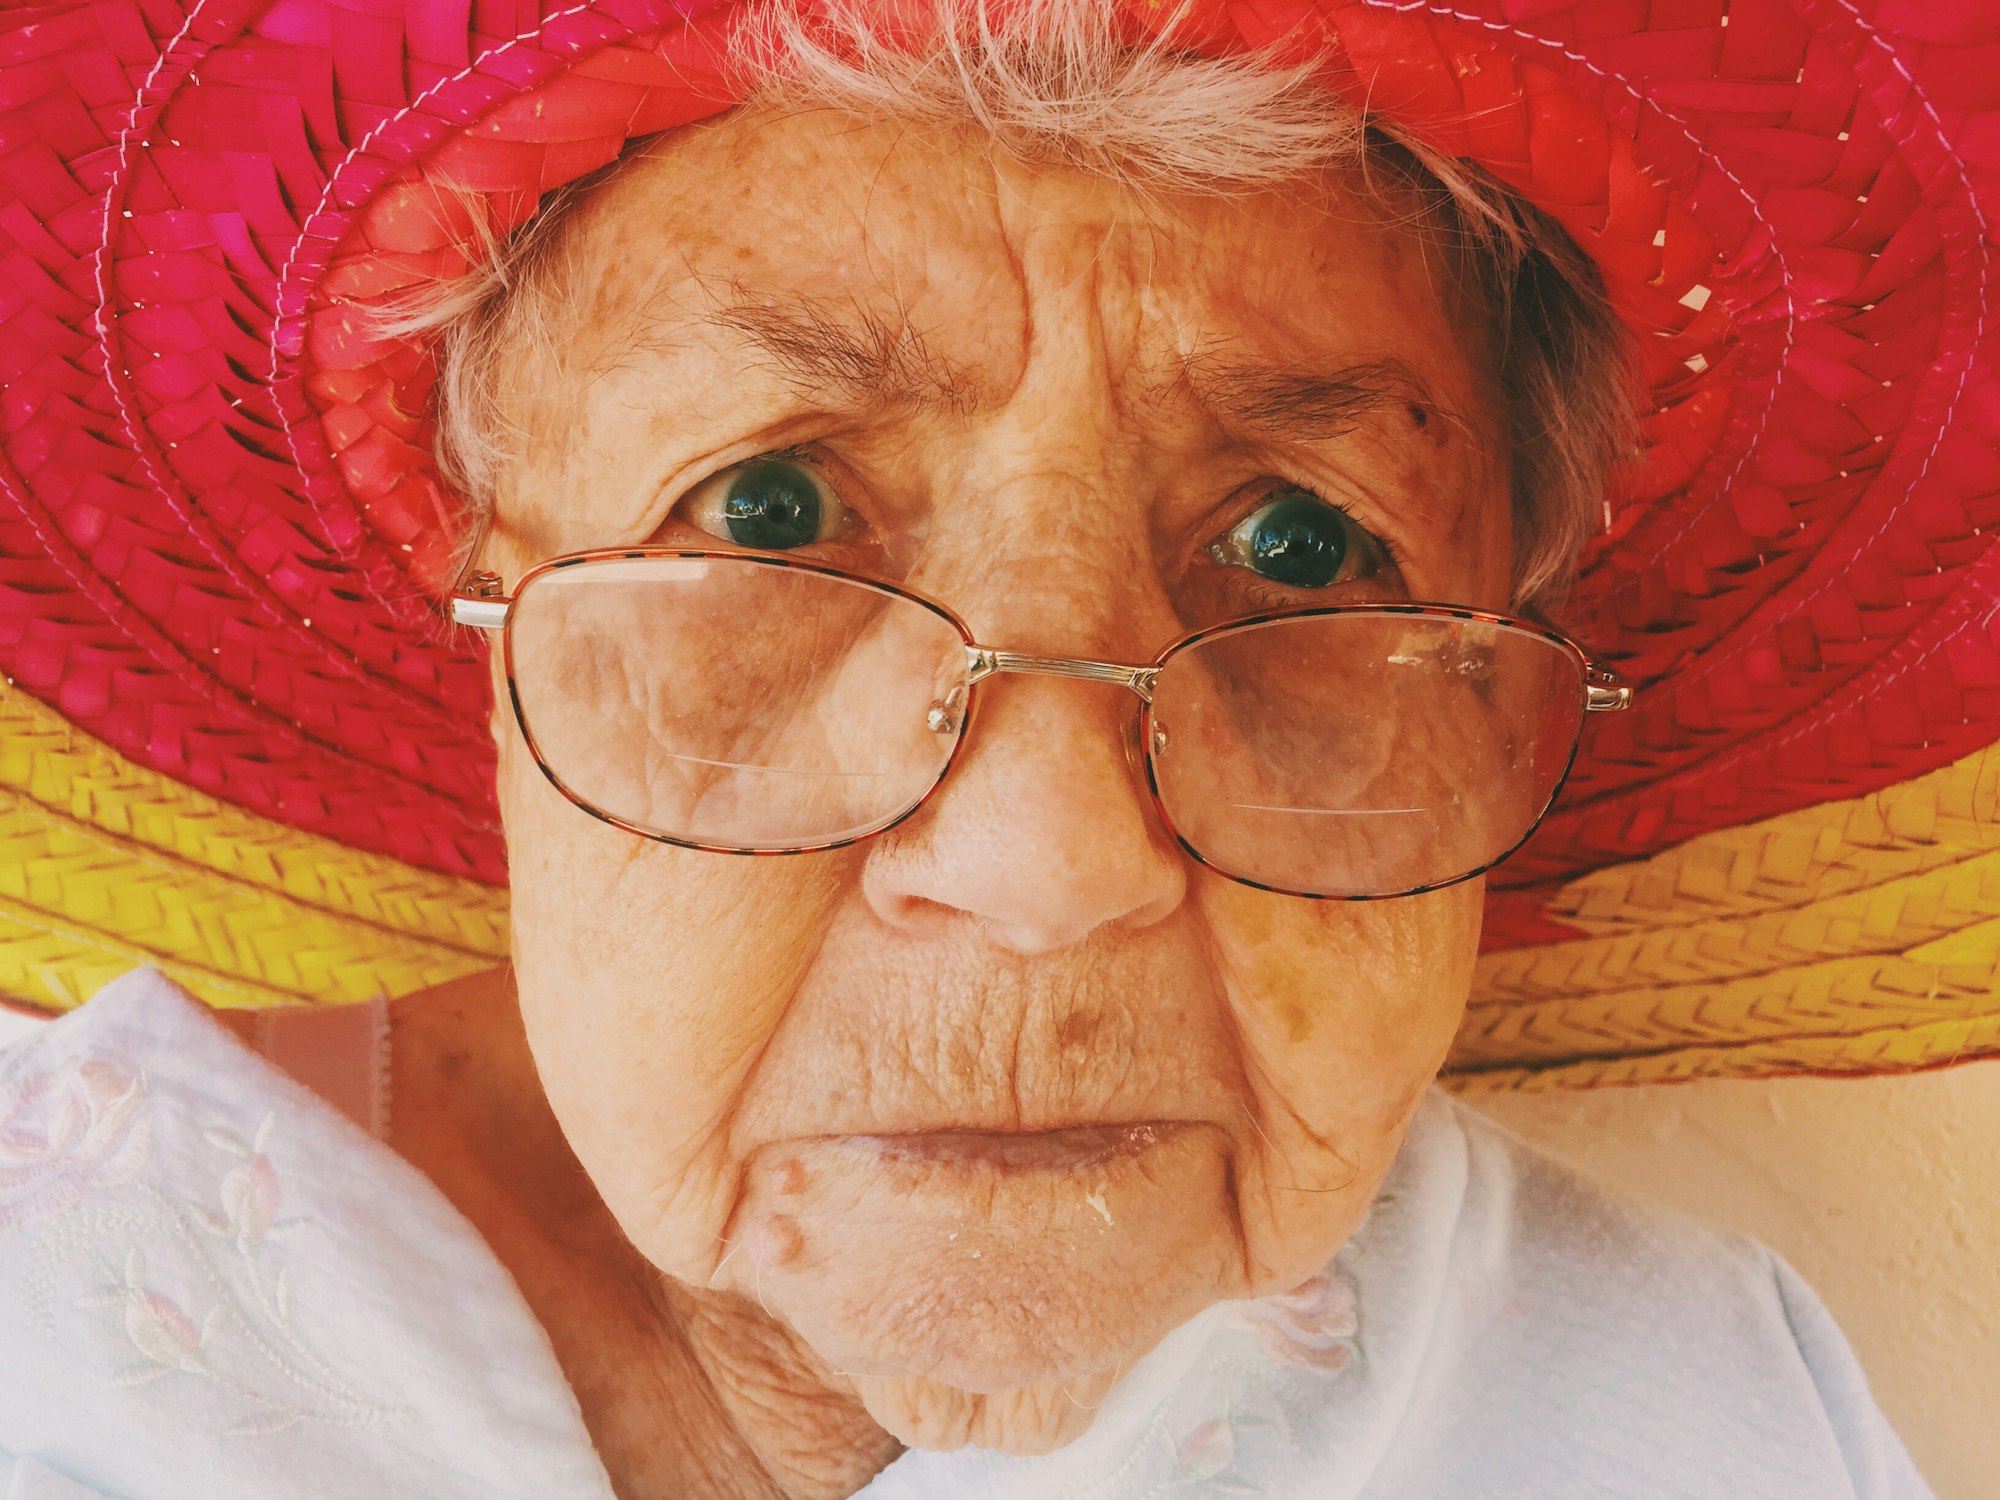 Even when you’re closing in on 100 years old, the experiences when you were young stay with you. My great grandmother is from western Ukraine, went through WWII, and saw a lot. Yet, amazingly, her fierce spirit shows through and mixes with her love for comedy. For this spontaneous shot, I found my Cinco de Mayo hat and plopped it on her. What makes the picture, though, is the life in her eyes and face. Be awake to your experiences.
- with love, Alex